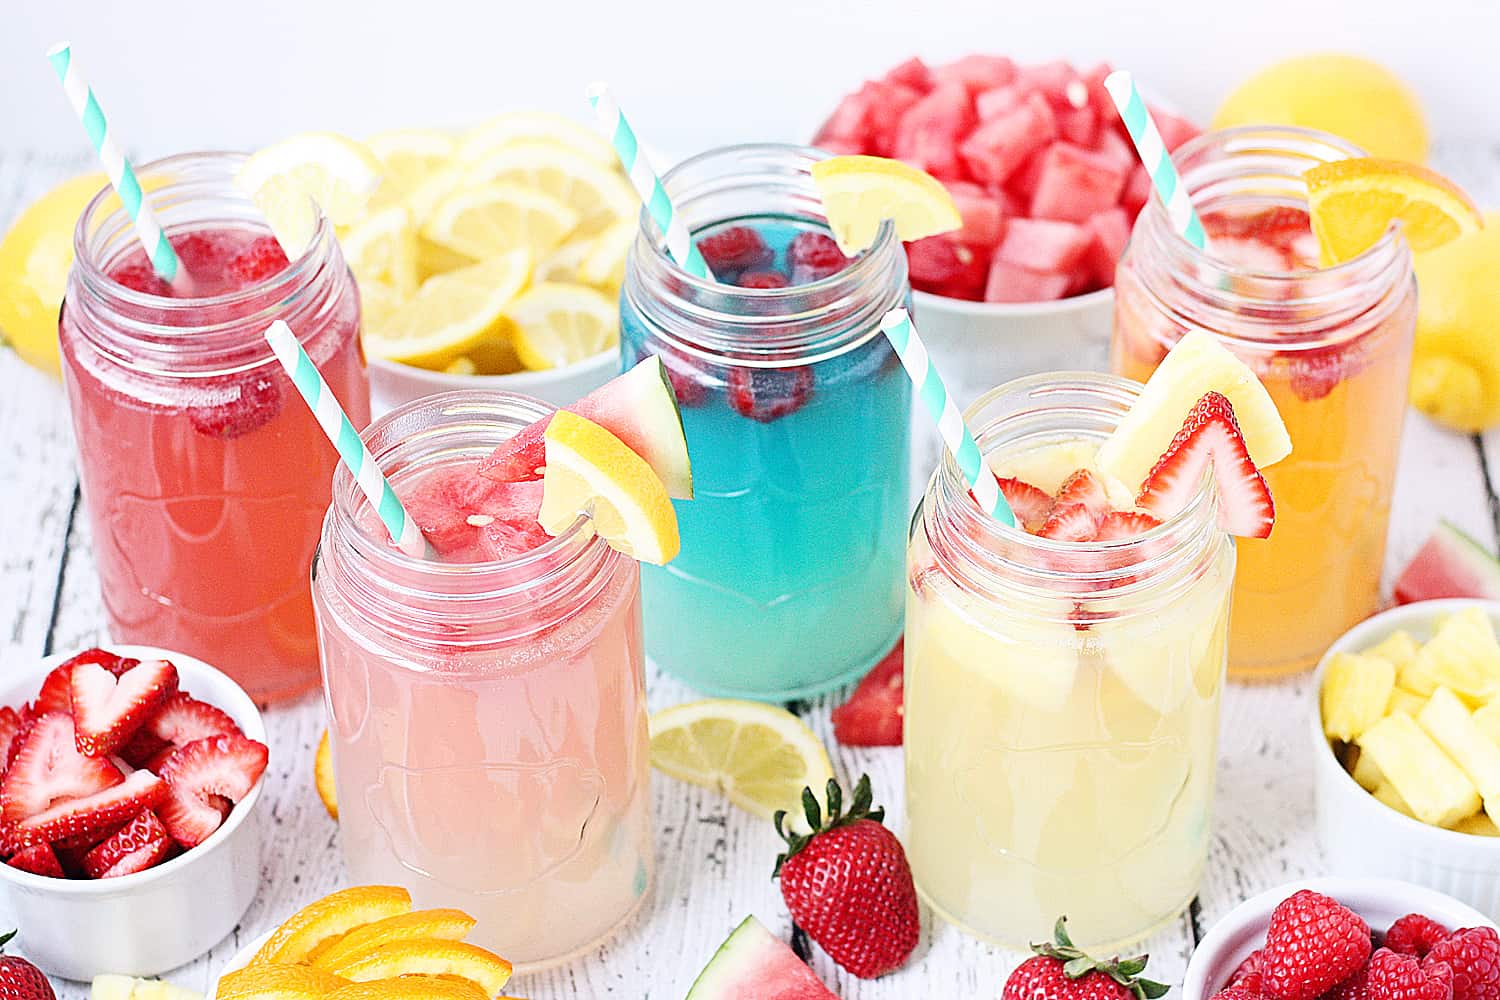 Lightened-up Lemonade Bar -- A lemonade bar is perfect for weekend brunch! This lightened-up version combines diet lemonade, sugar-free Torani syrups, and fresh fruit for a variety of fabulous flavor combinations. | halfscratched.com